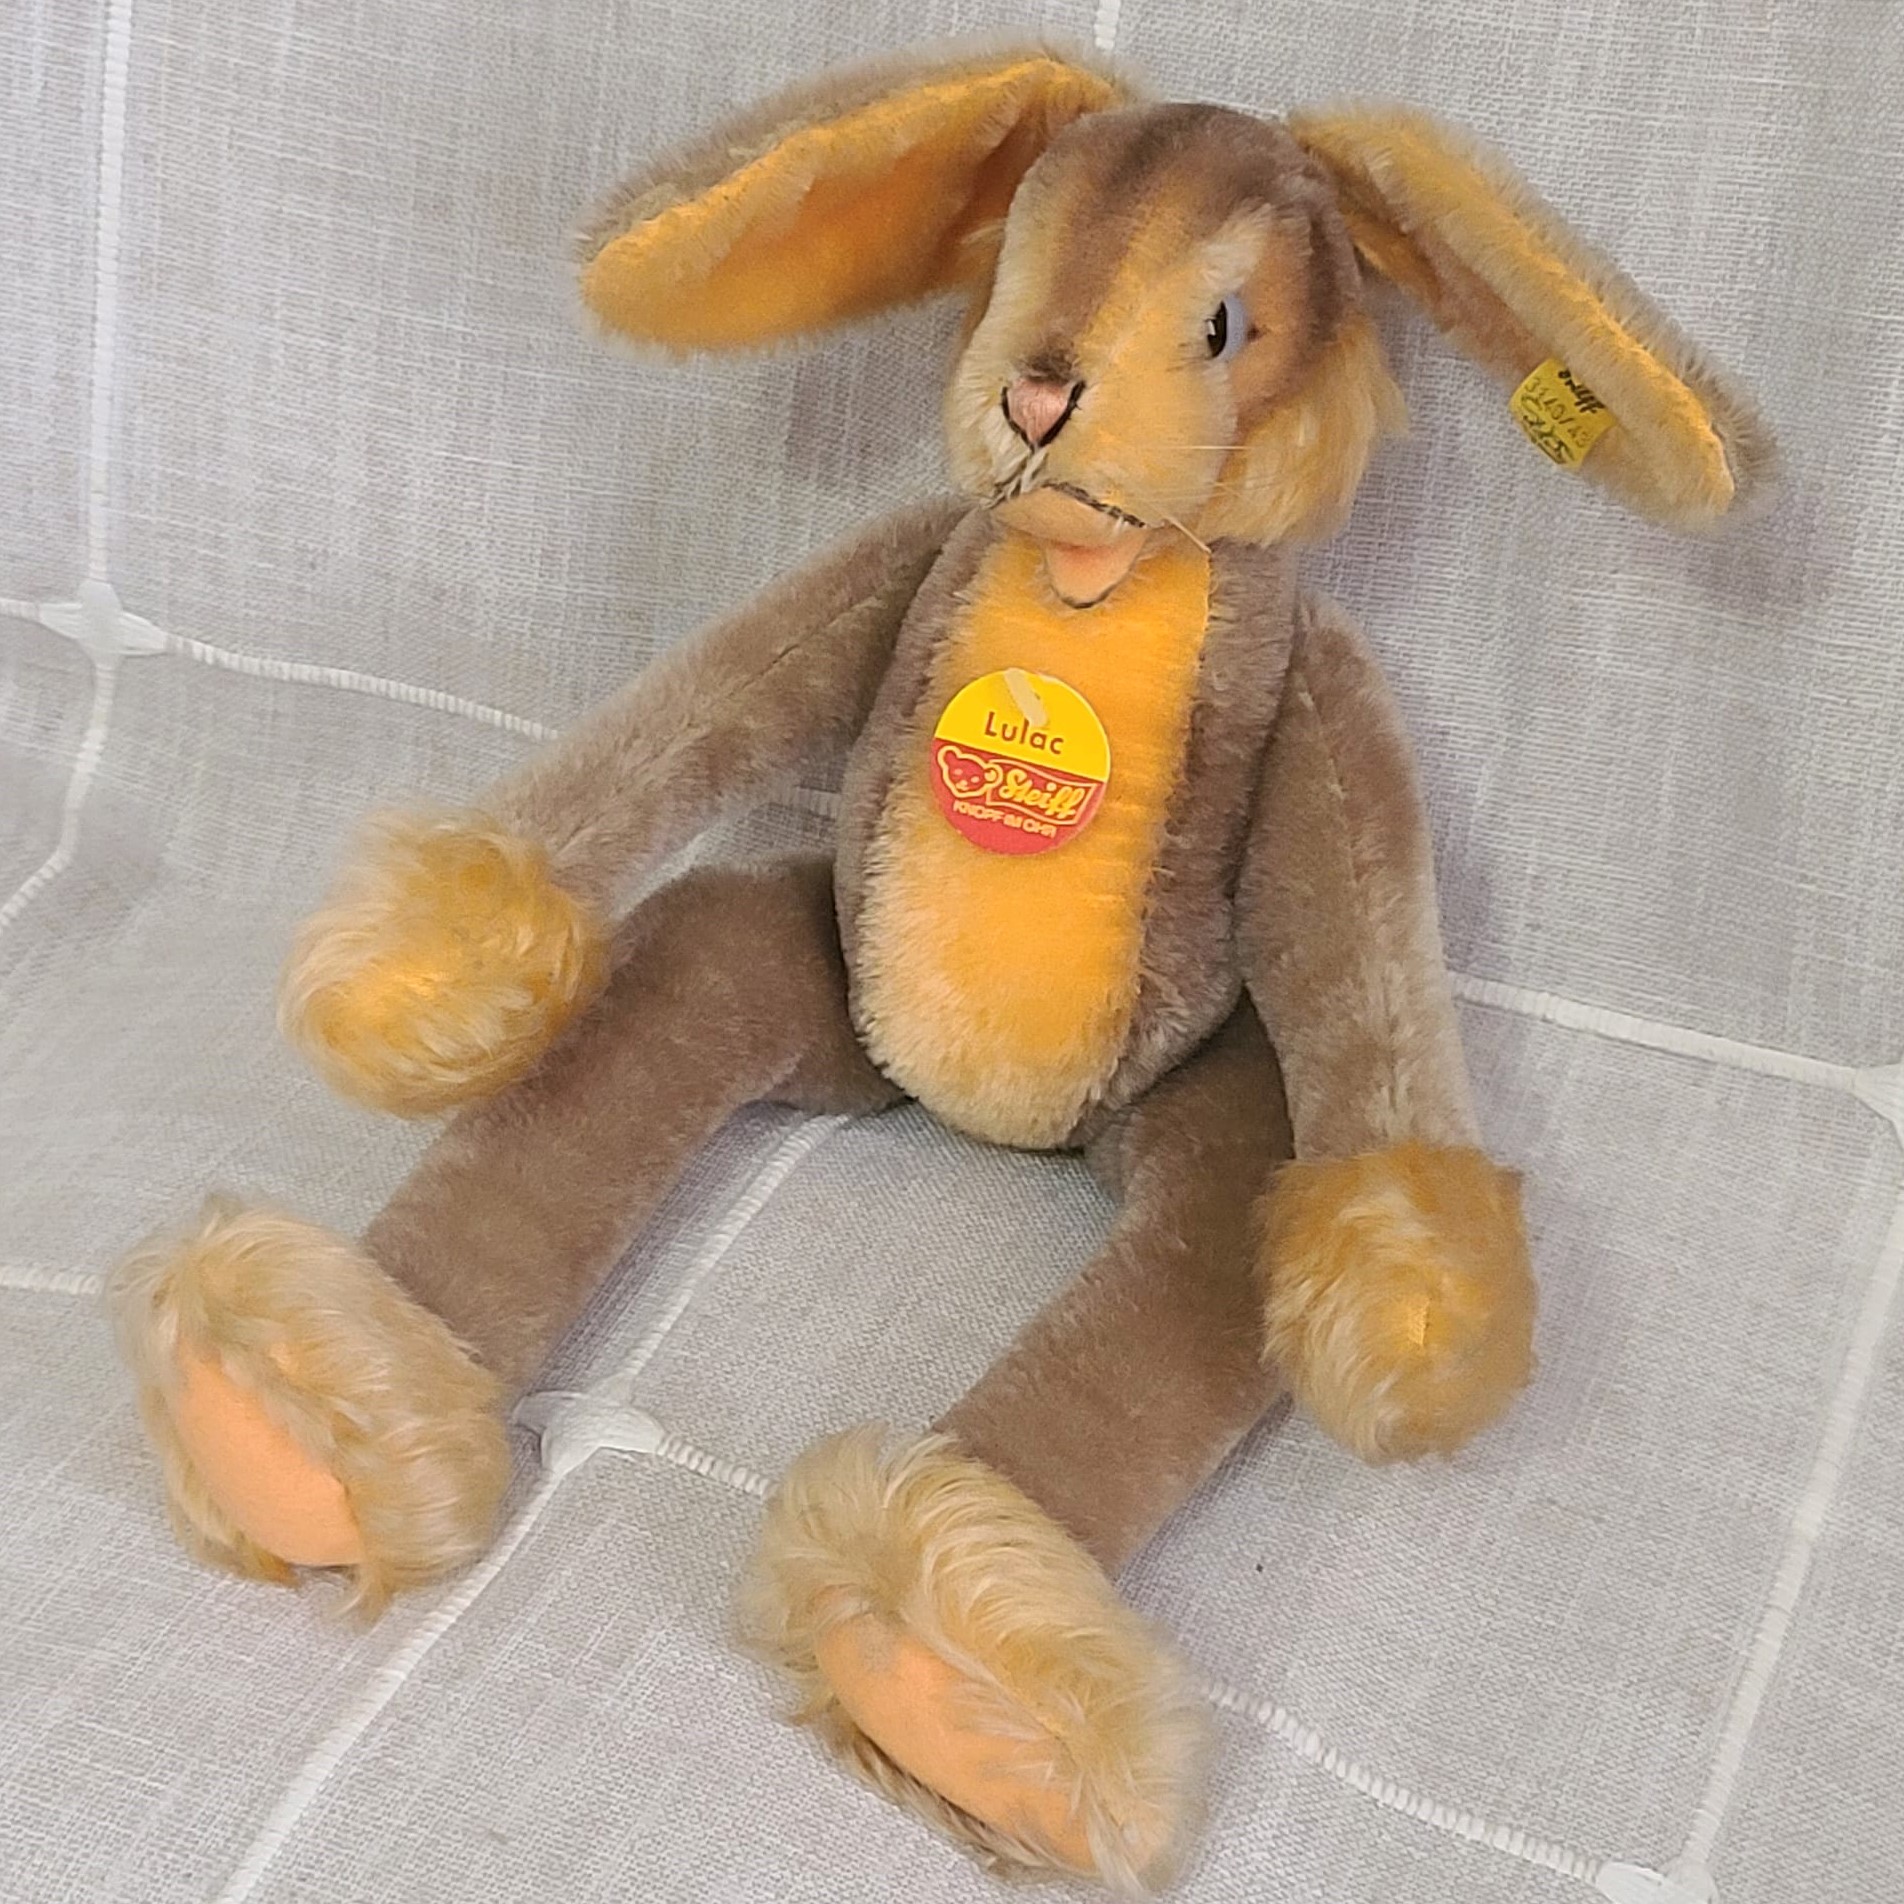 STEIFF Lulac mohair bunny rabbit 17" with tag - Click Image to Close